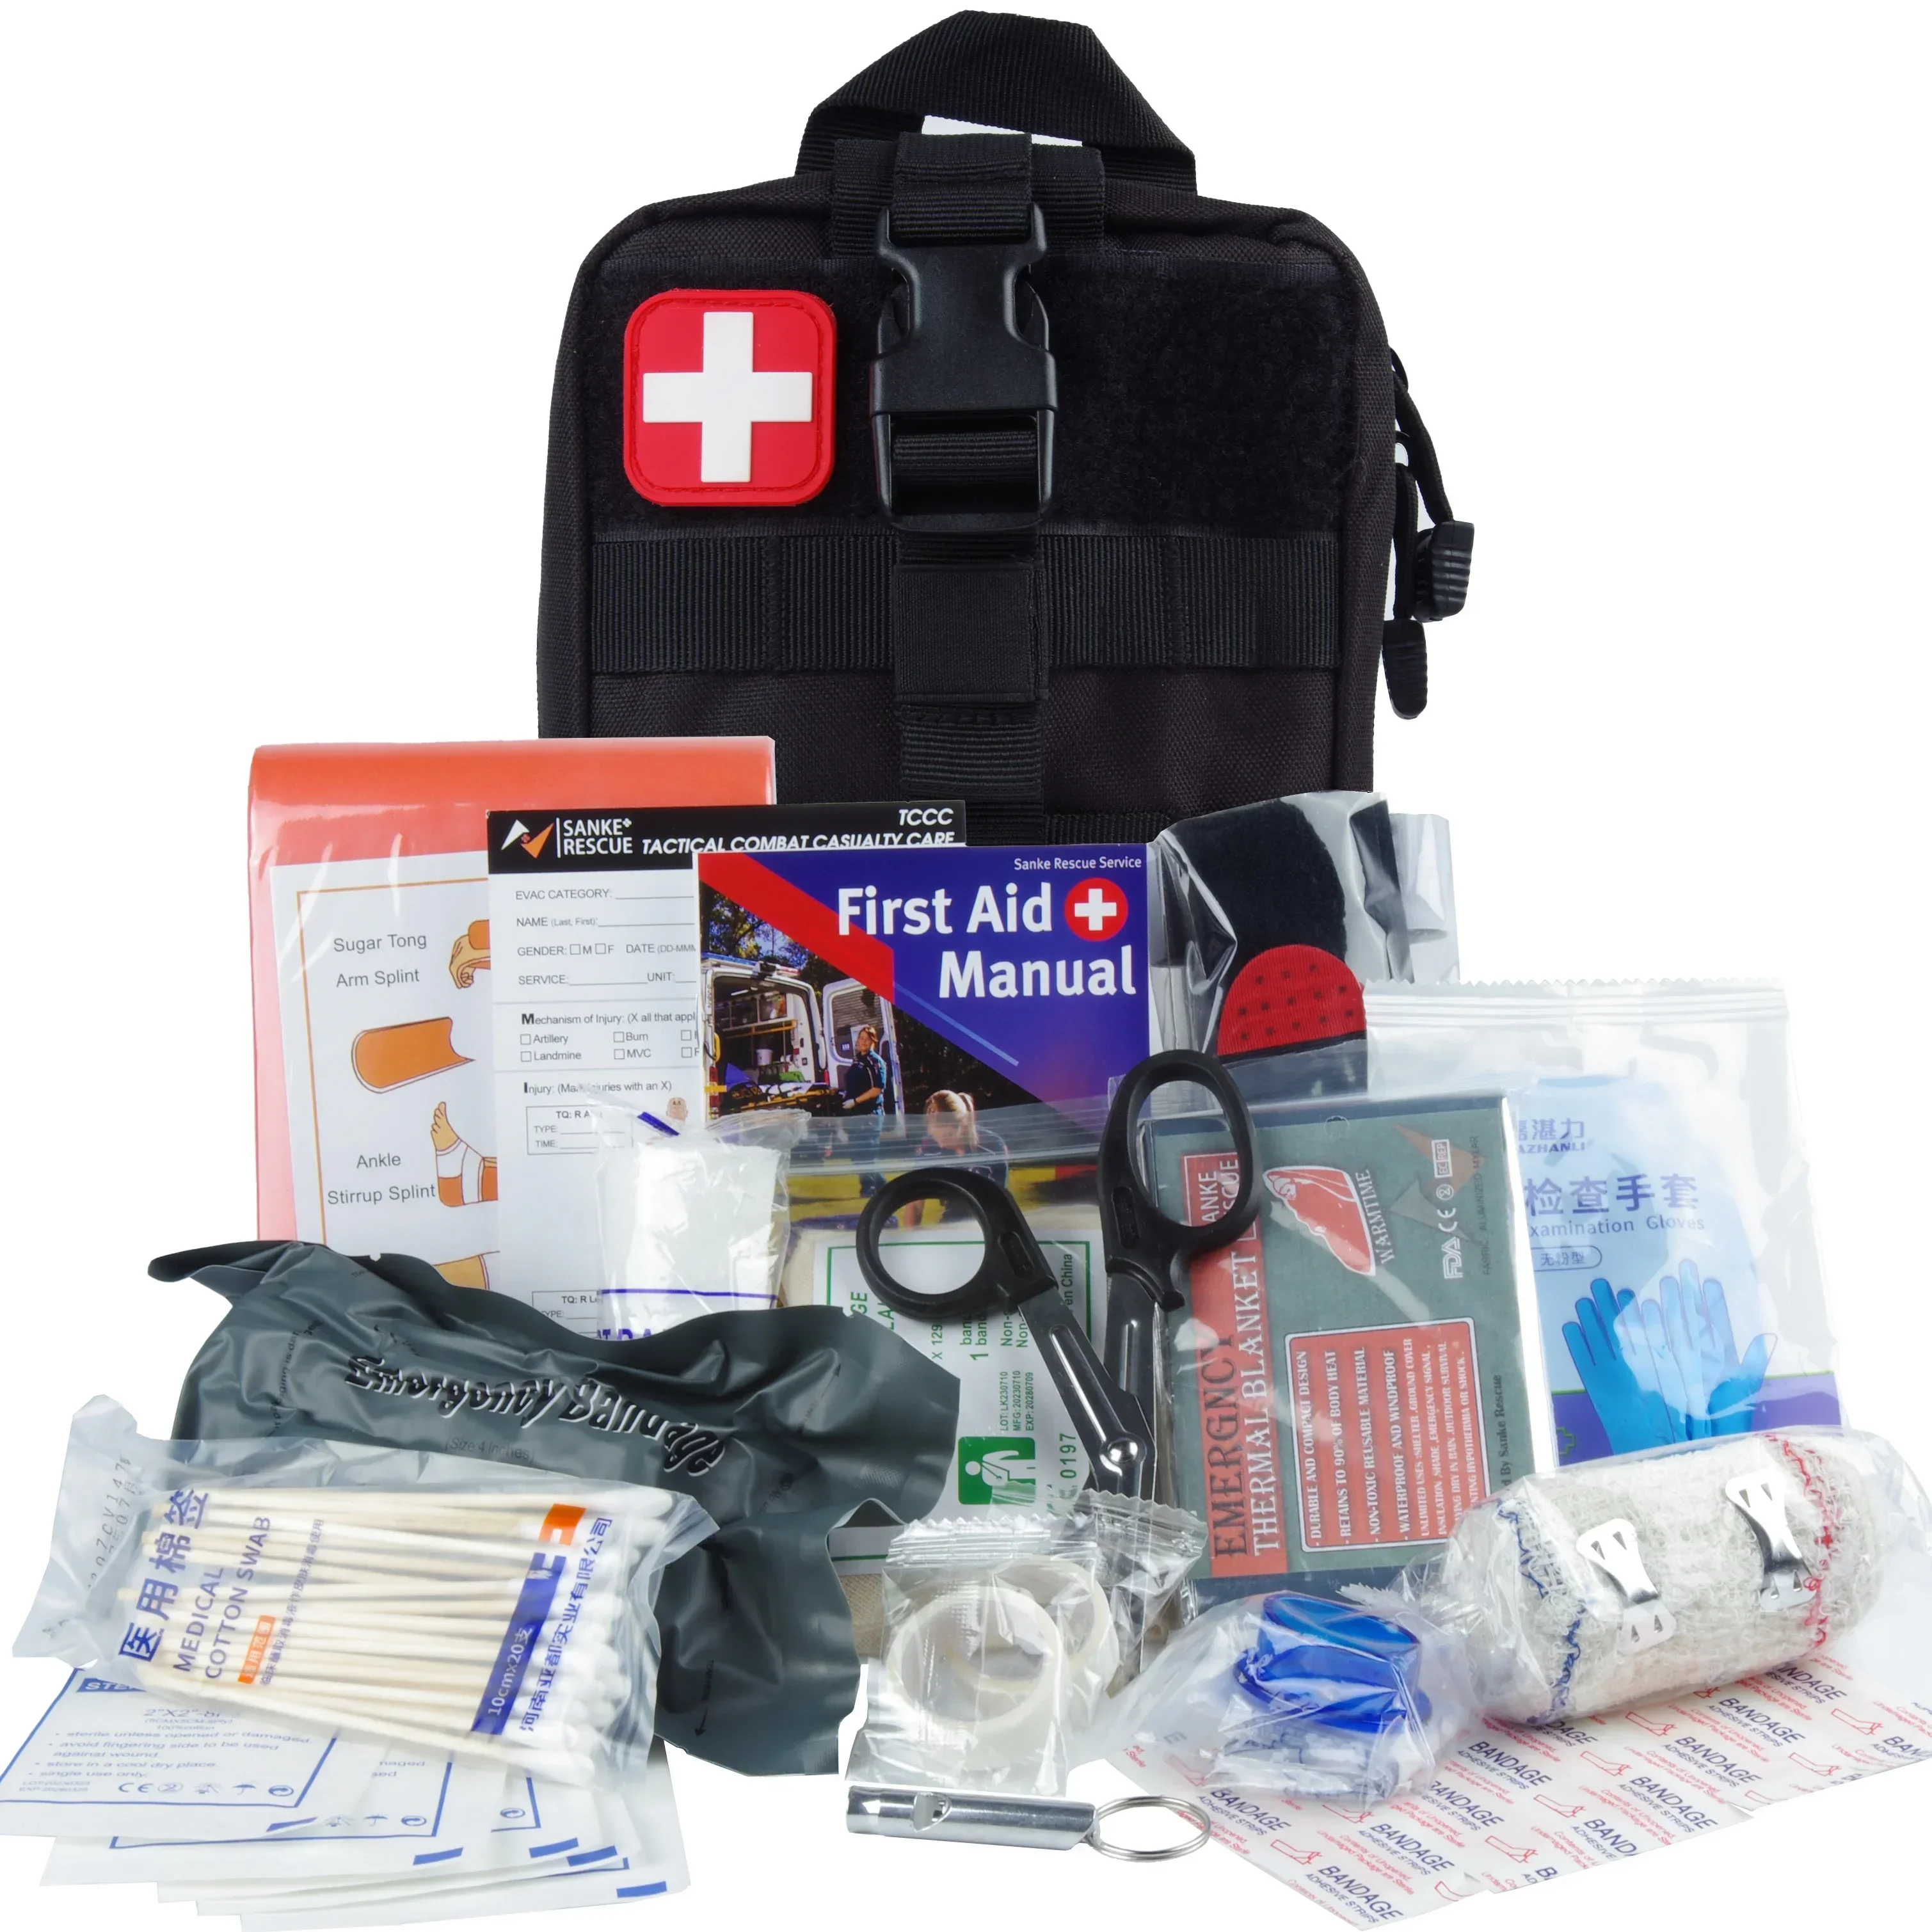 Survival First Aid Kit Survival Military Full Set Molle Outdoor Gear Emergency - £38.11 GBP